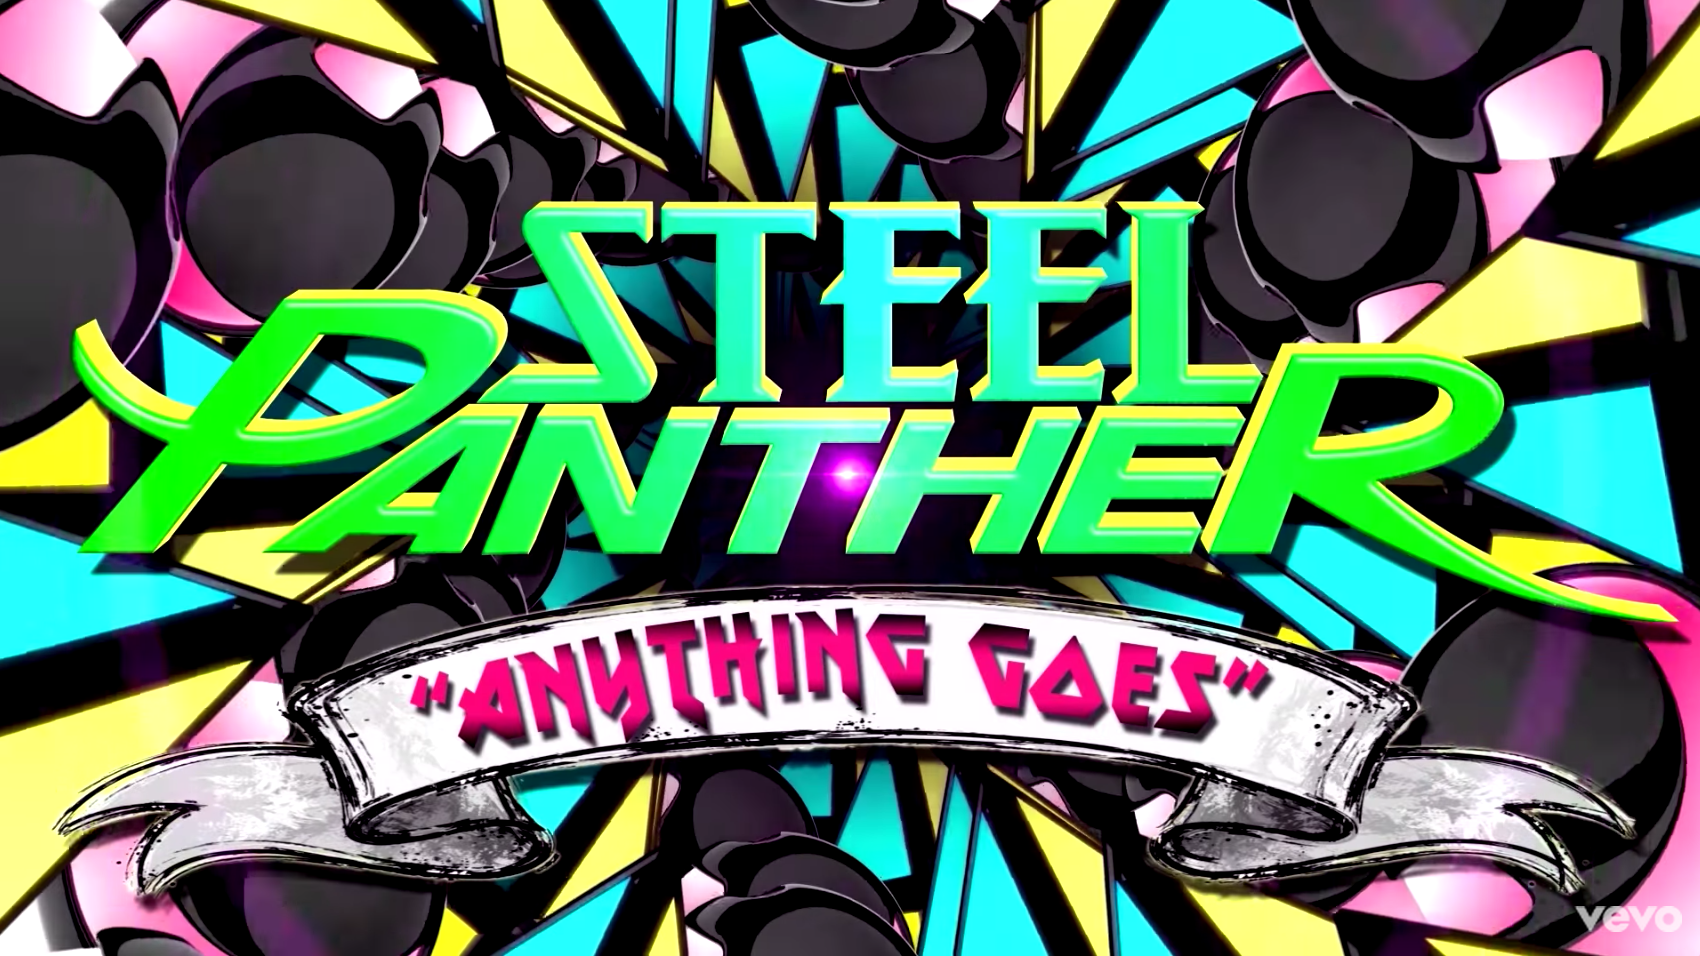 STEEL PANTHER - Anything Goes cover 